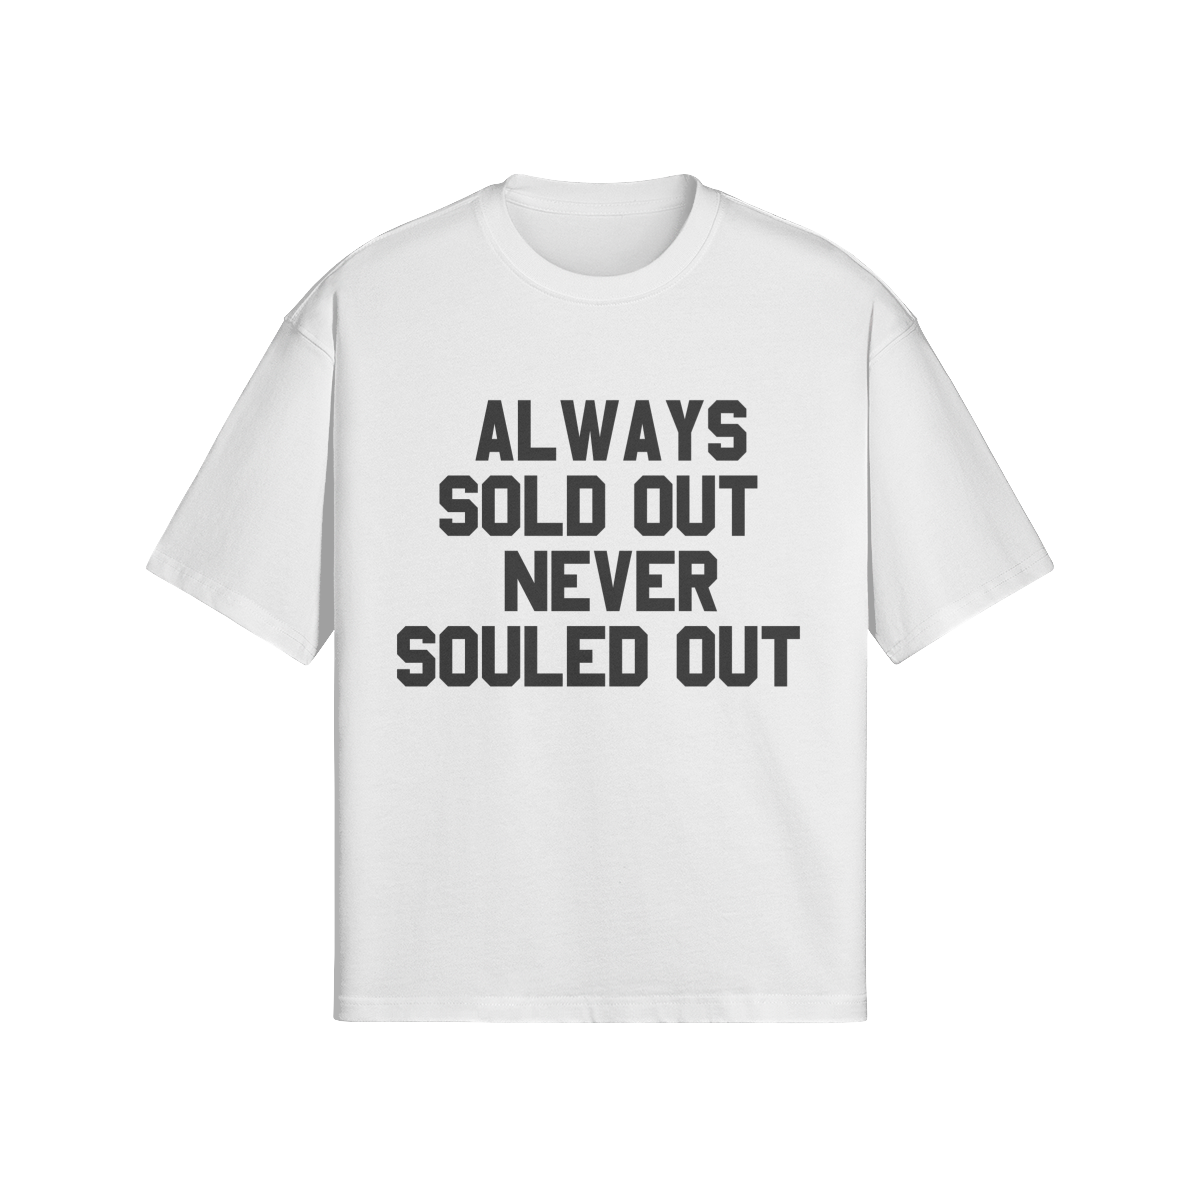 ALWAYS SOLD OUT NEVER SOULED OUT T-SHIRT